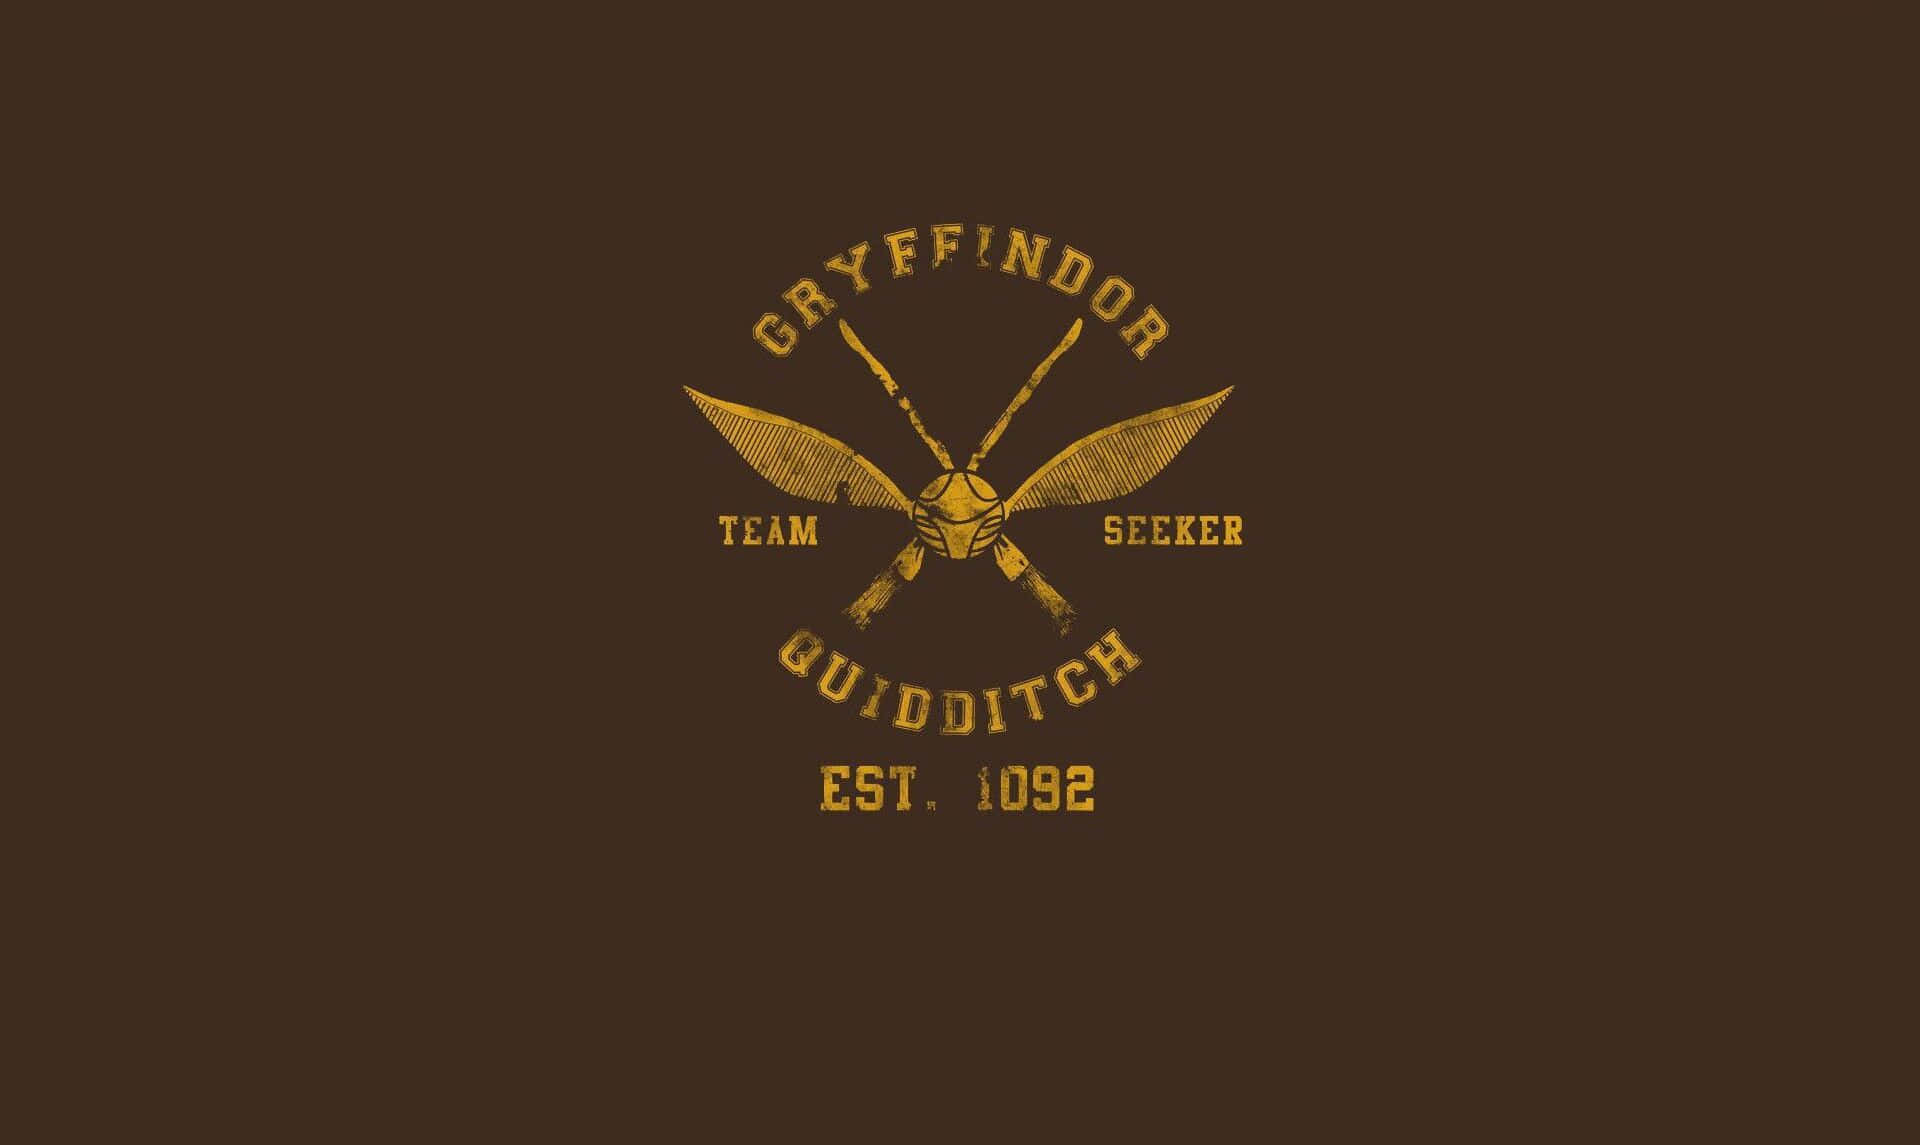 The Hogwarts Quidditch Team is Ready to Take Flight Wallpaper